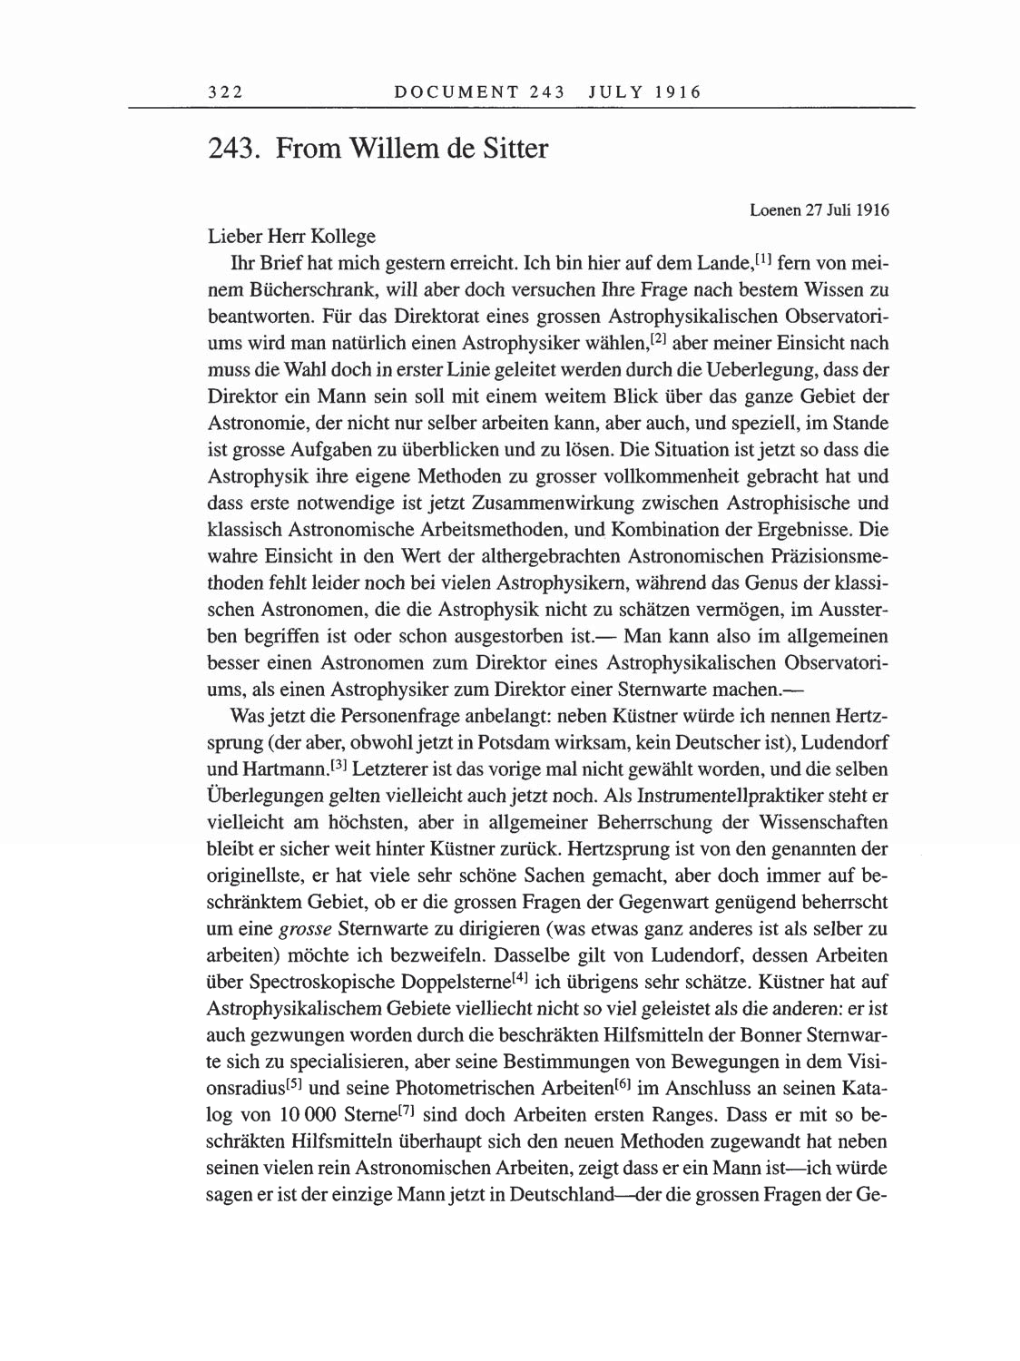 Volume 8, Part A: The Berlin Years: Correspondence 1914-1917 page 322